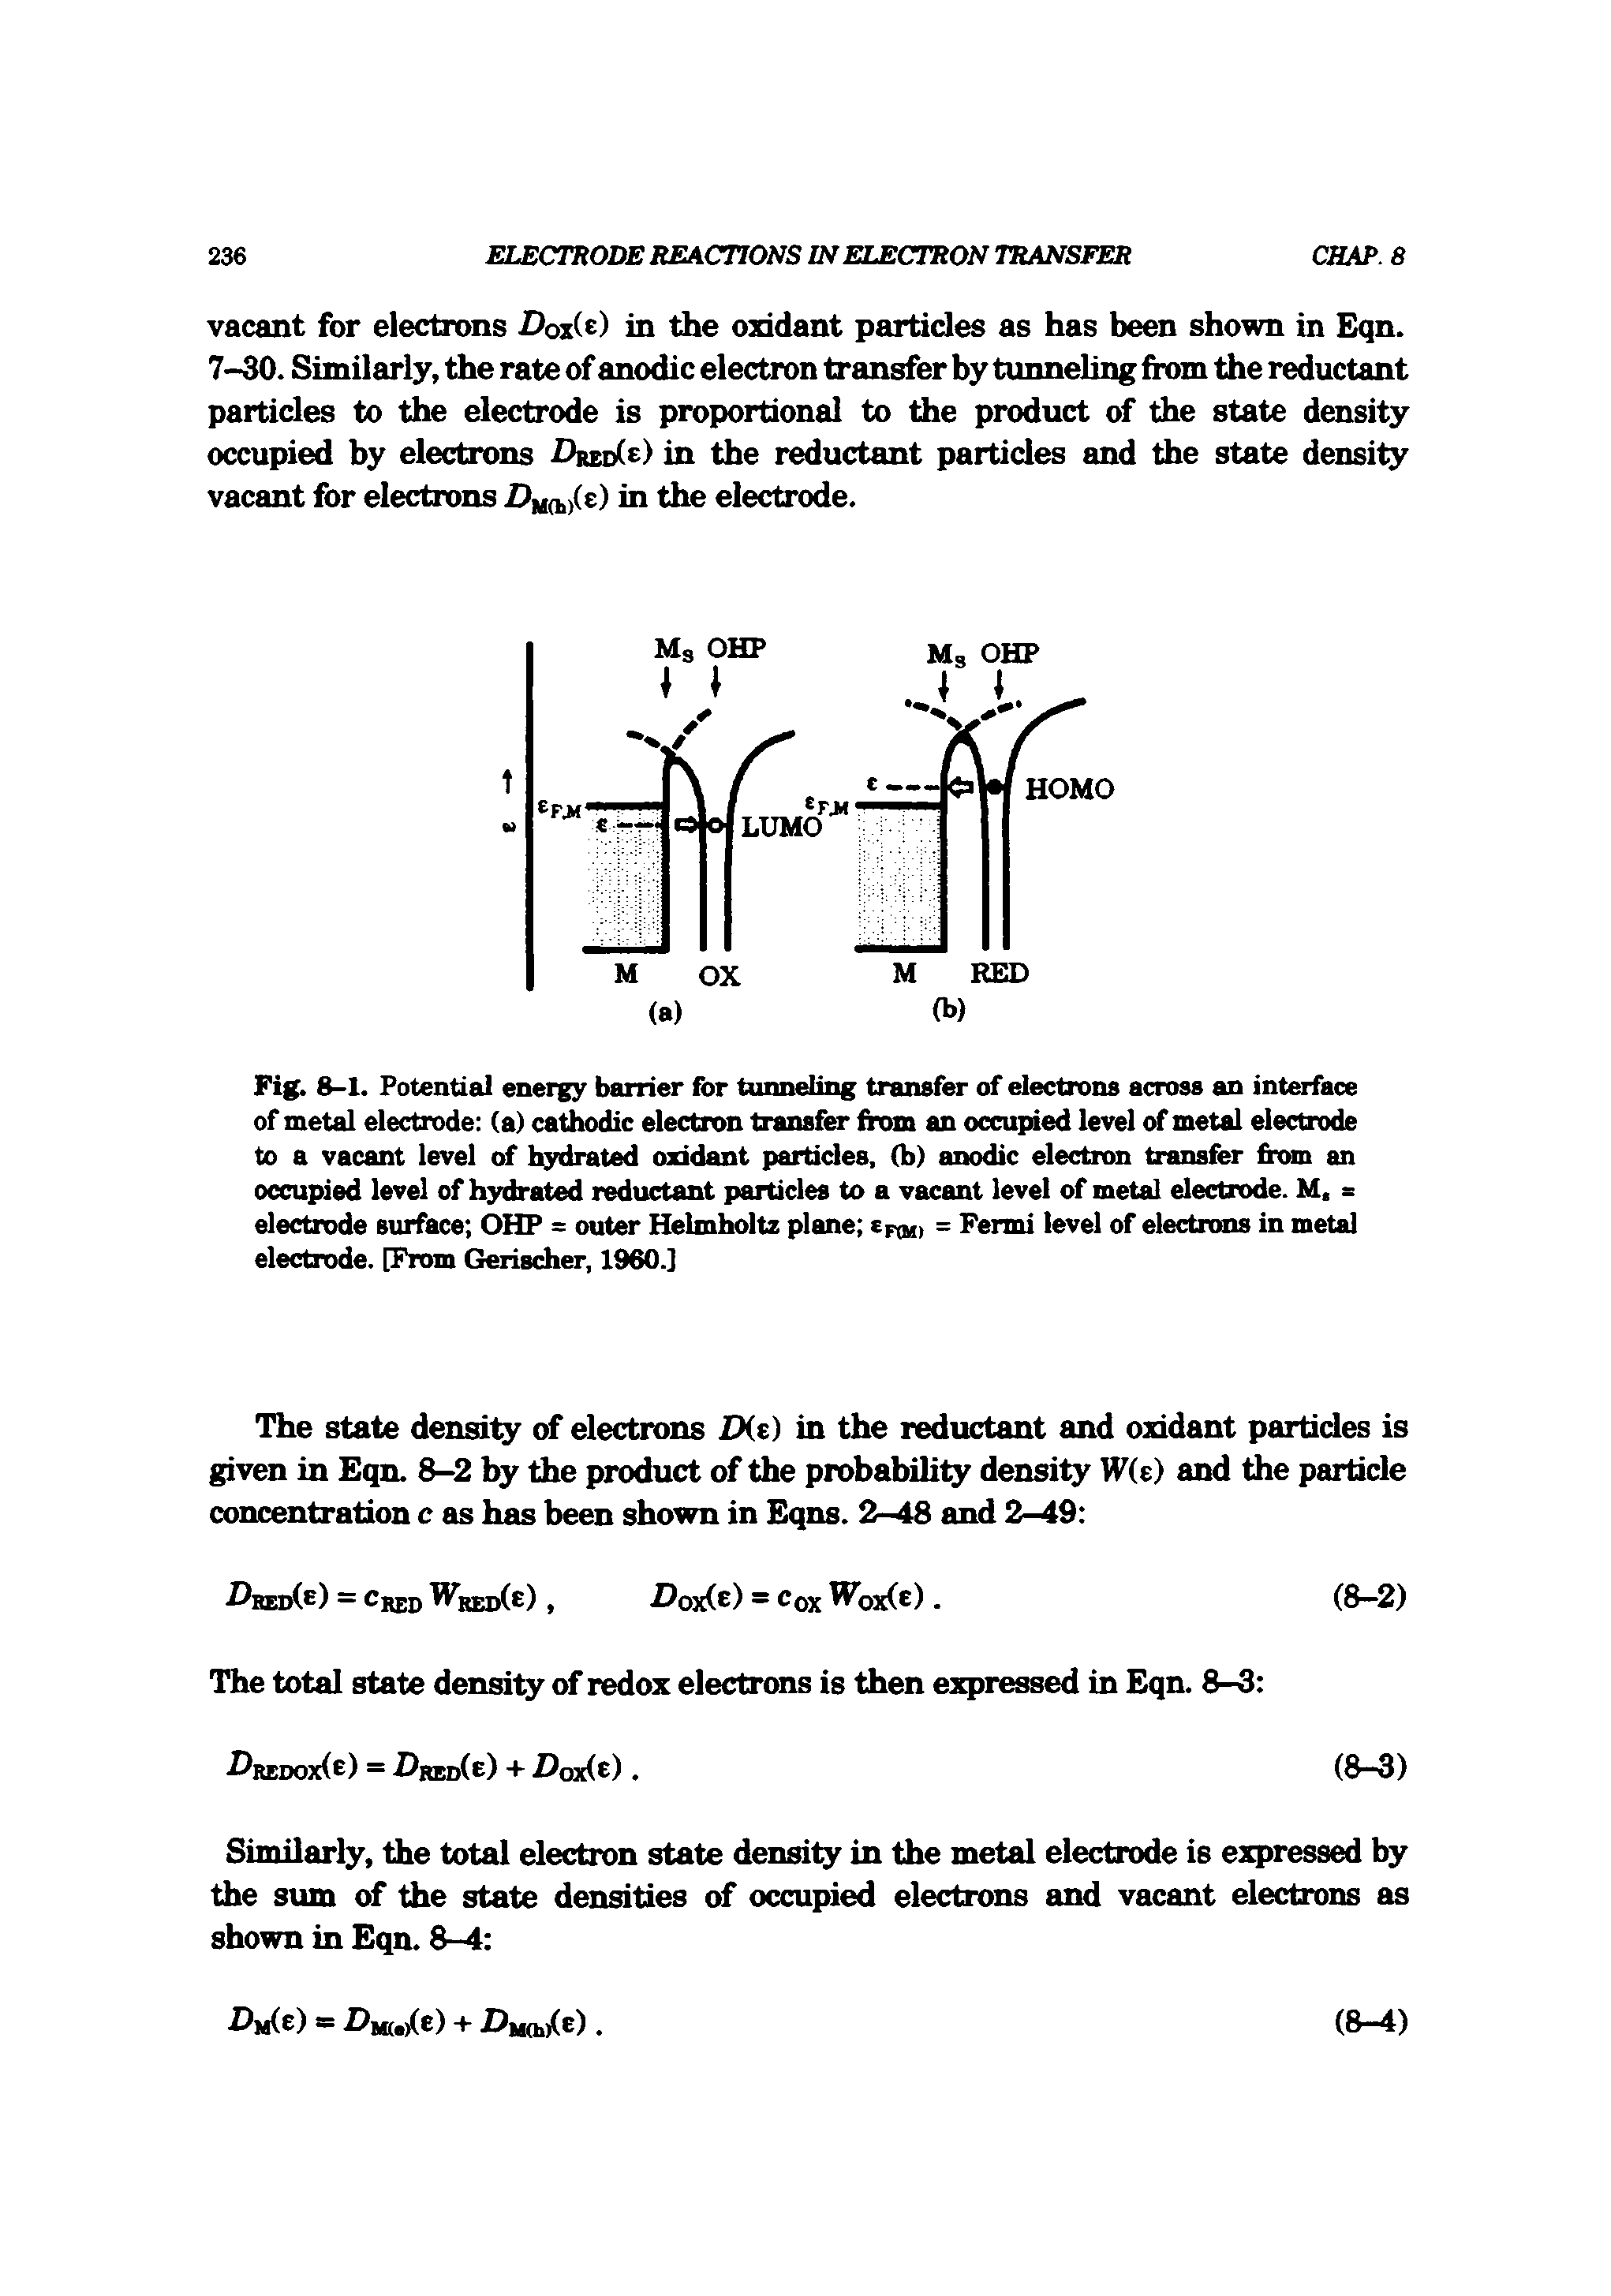 Fig. 8-1. Potential energy barrier for tunneling transfer of electrons across an interface of metal electrode (a) cathodic electron transfer from an occupied level of metal electrode to a vacant level of l drated oxidant particles, (b) anodic electron transfer fiom an occupied level of hjrdrated reductant particles to a vacant level of metal electrode. M. = electrode surface OHP = outer Helmholtz plane cfuh = Fermi level of electnms in metal electrode. [From Gerischer, I960.]...